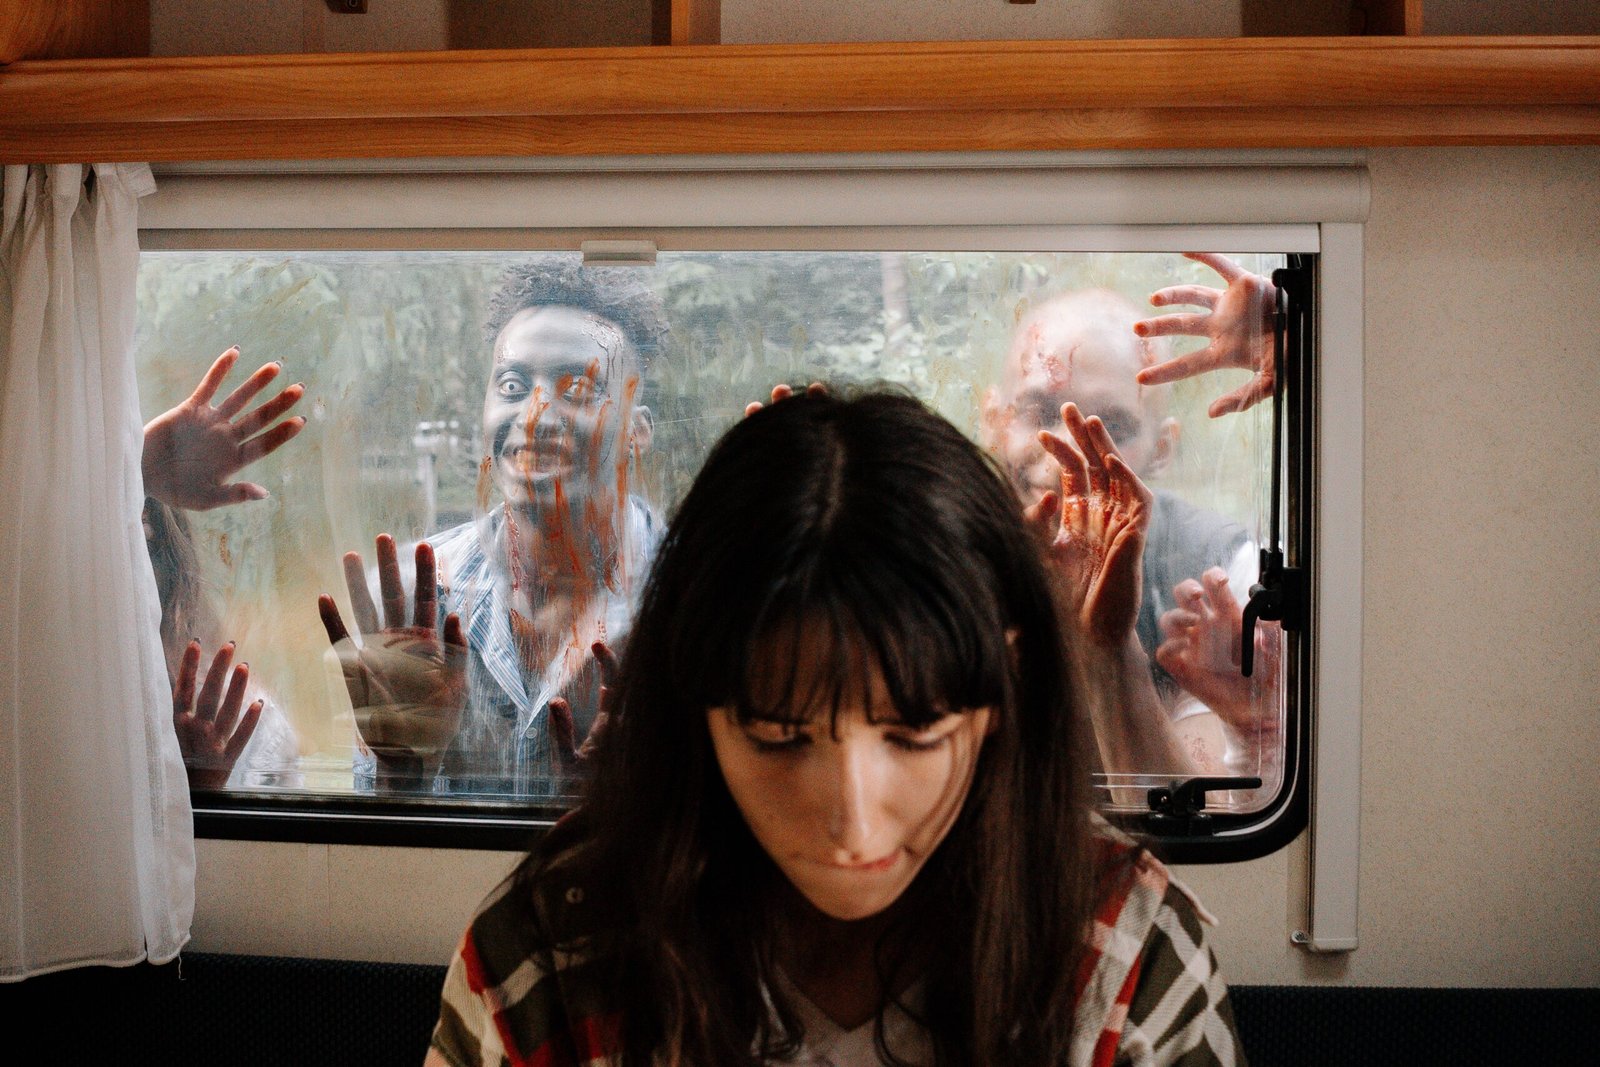 Zombies looking in a window on a mobile home